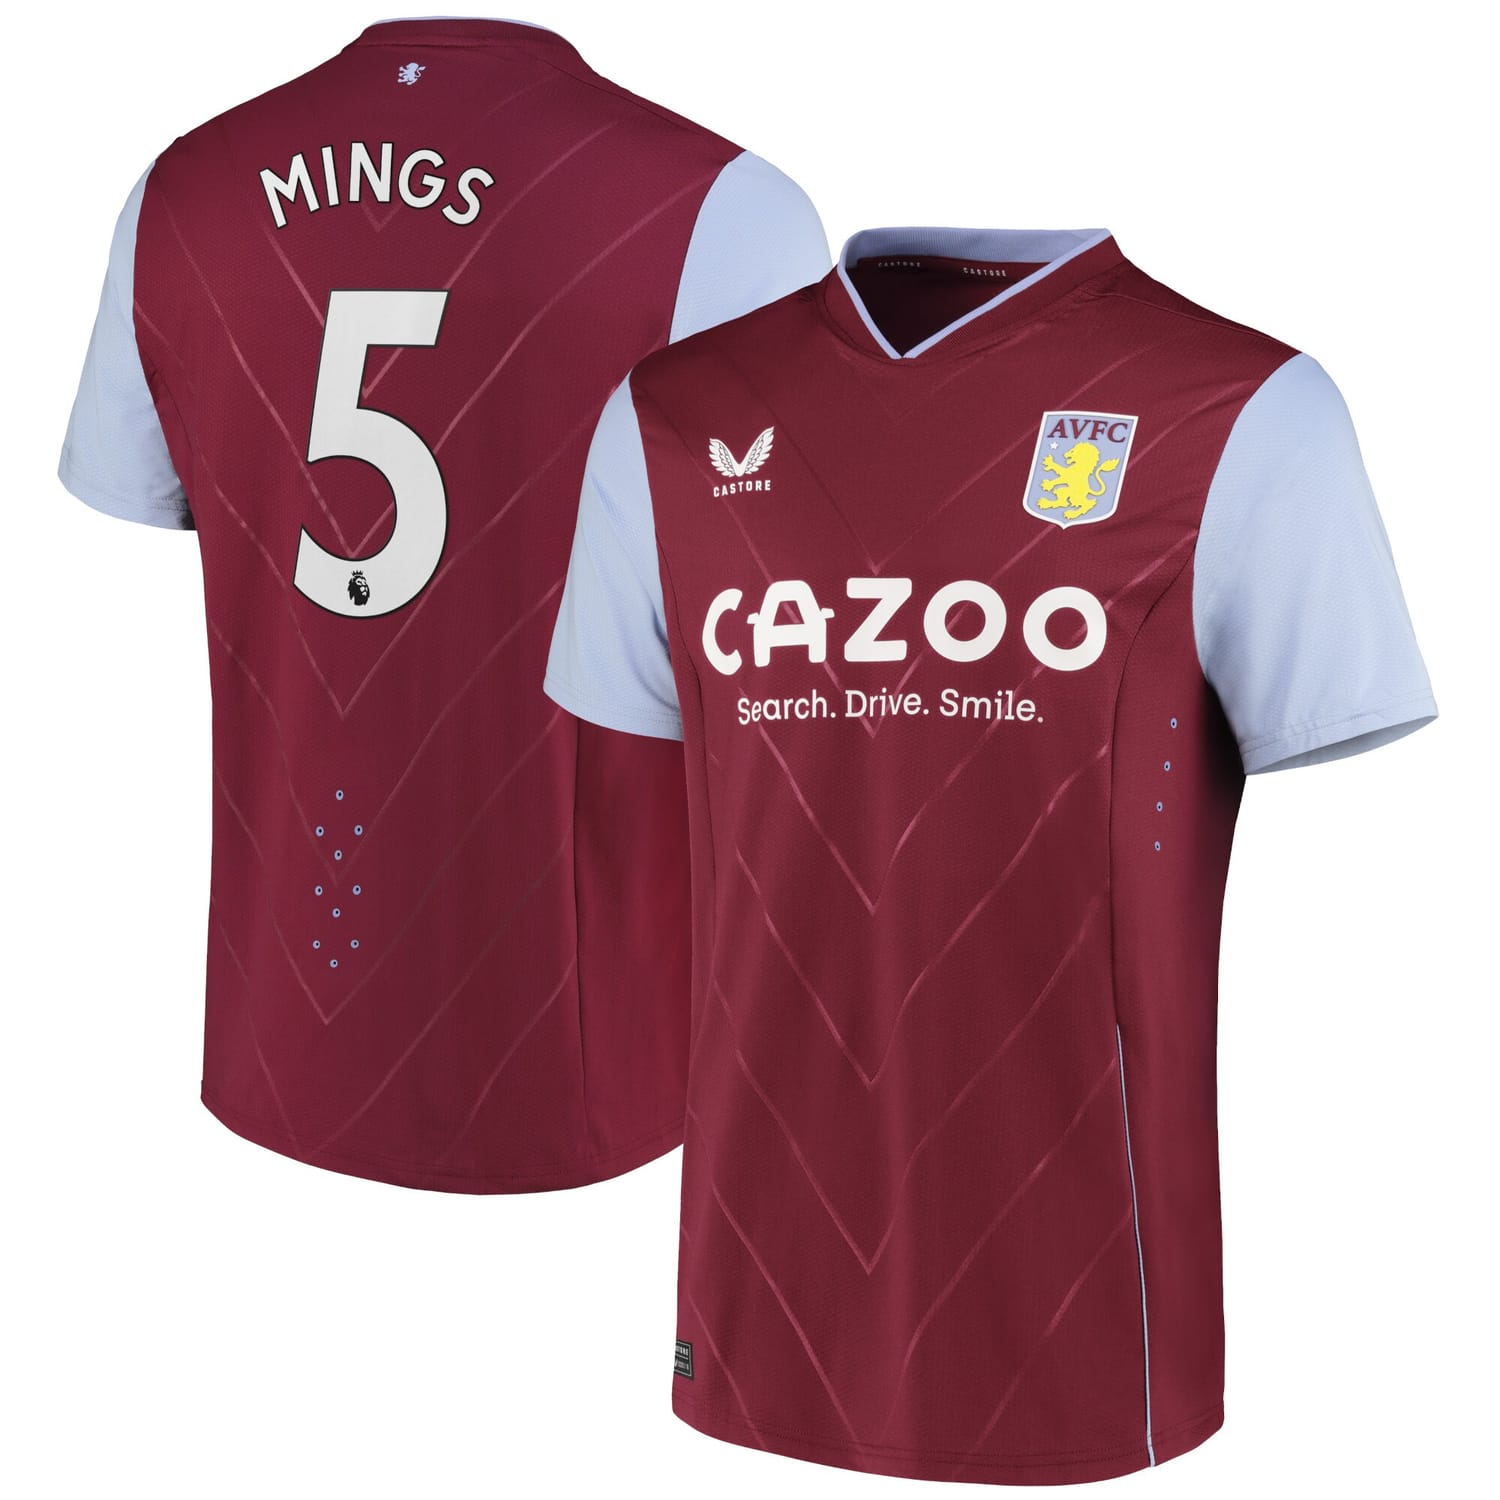 Premier League Ast. Villa Home Pro Jersey Shirt 2022-23 player Tyrone Mings 5 printing for Men